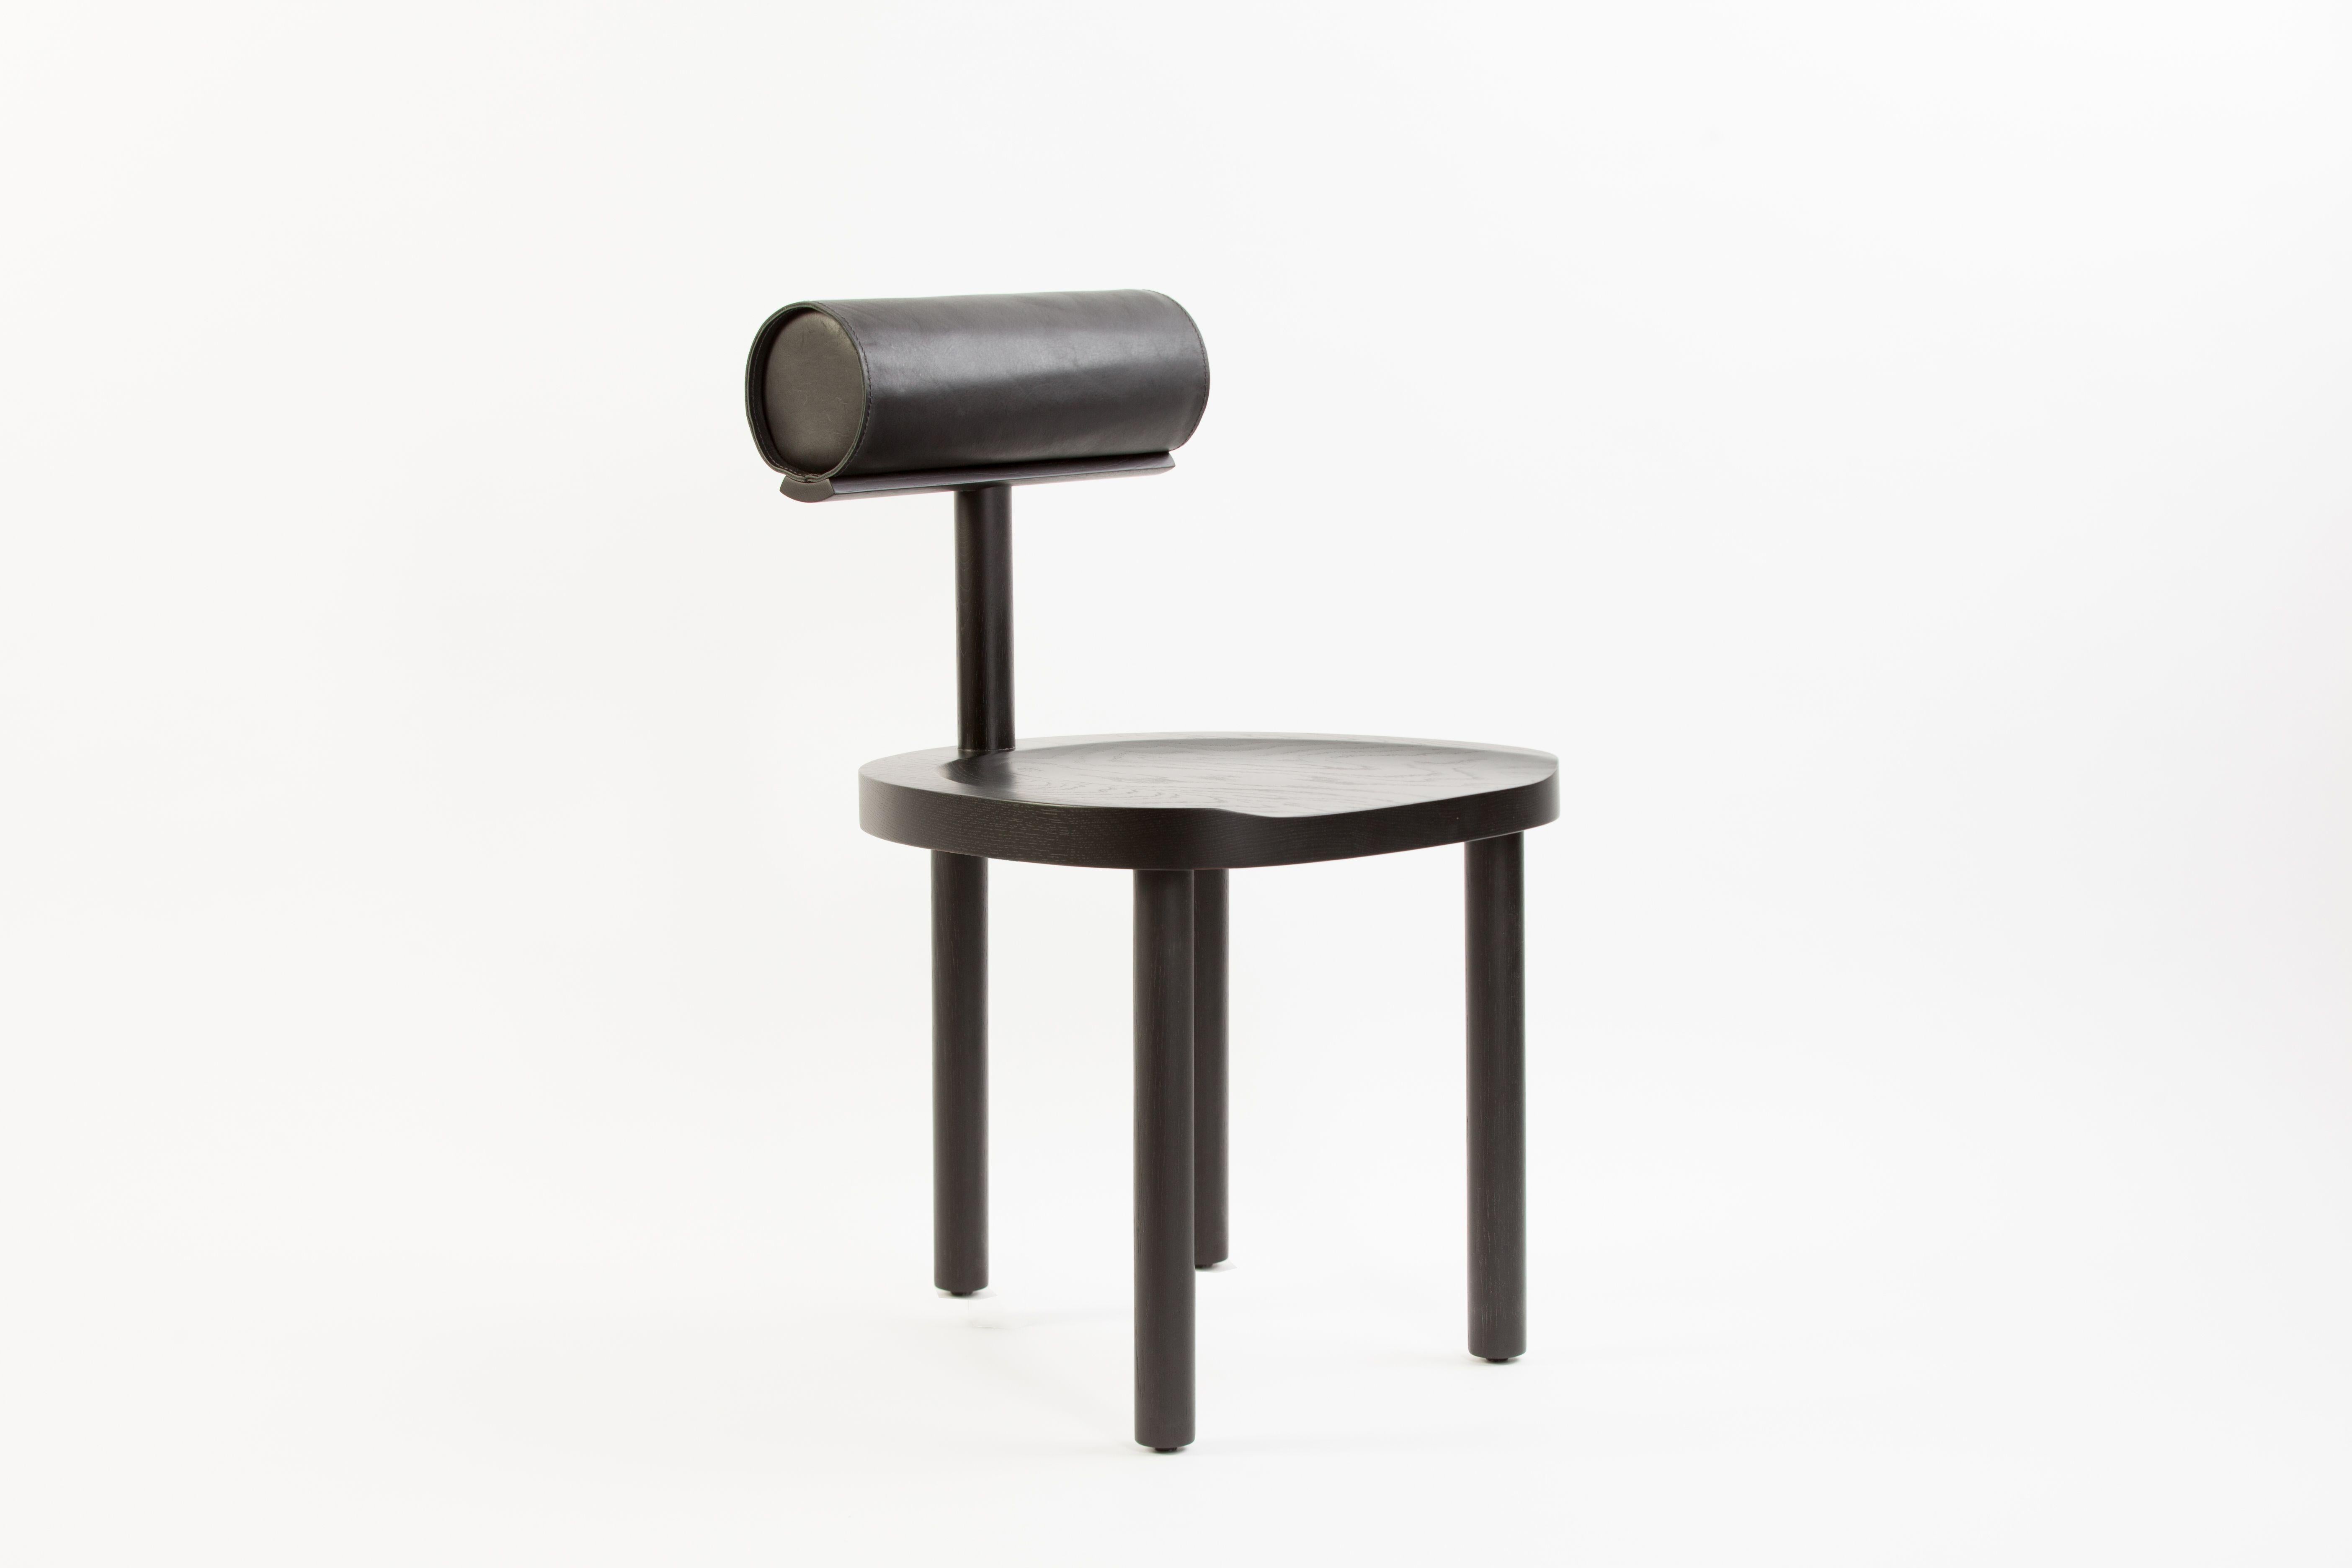 Una black chair by Estudio Persona
Dimensions: W 45.7 x D 48.3 x H 78.8 cm
Materials: Solid ash, stained black finish, black vegetable leather

Dining chair in solid ash, stained black finish, upholstered back bolster in black vegetable leather,